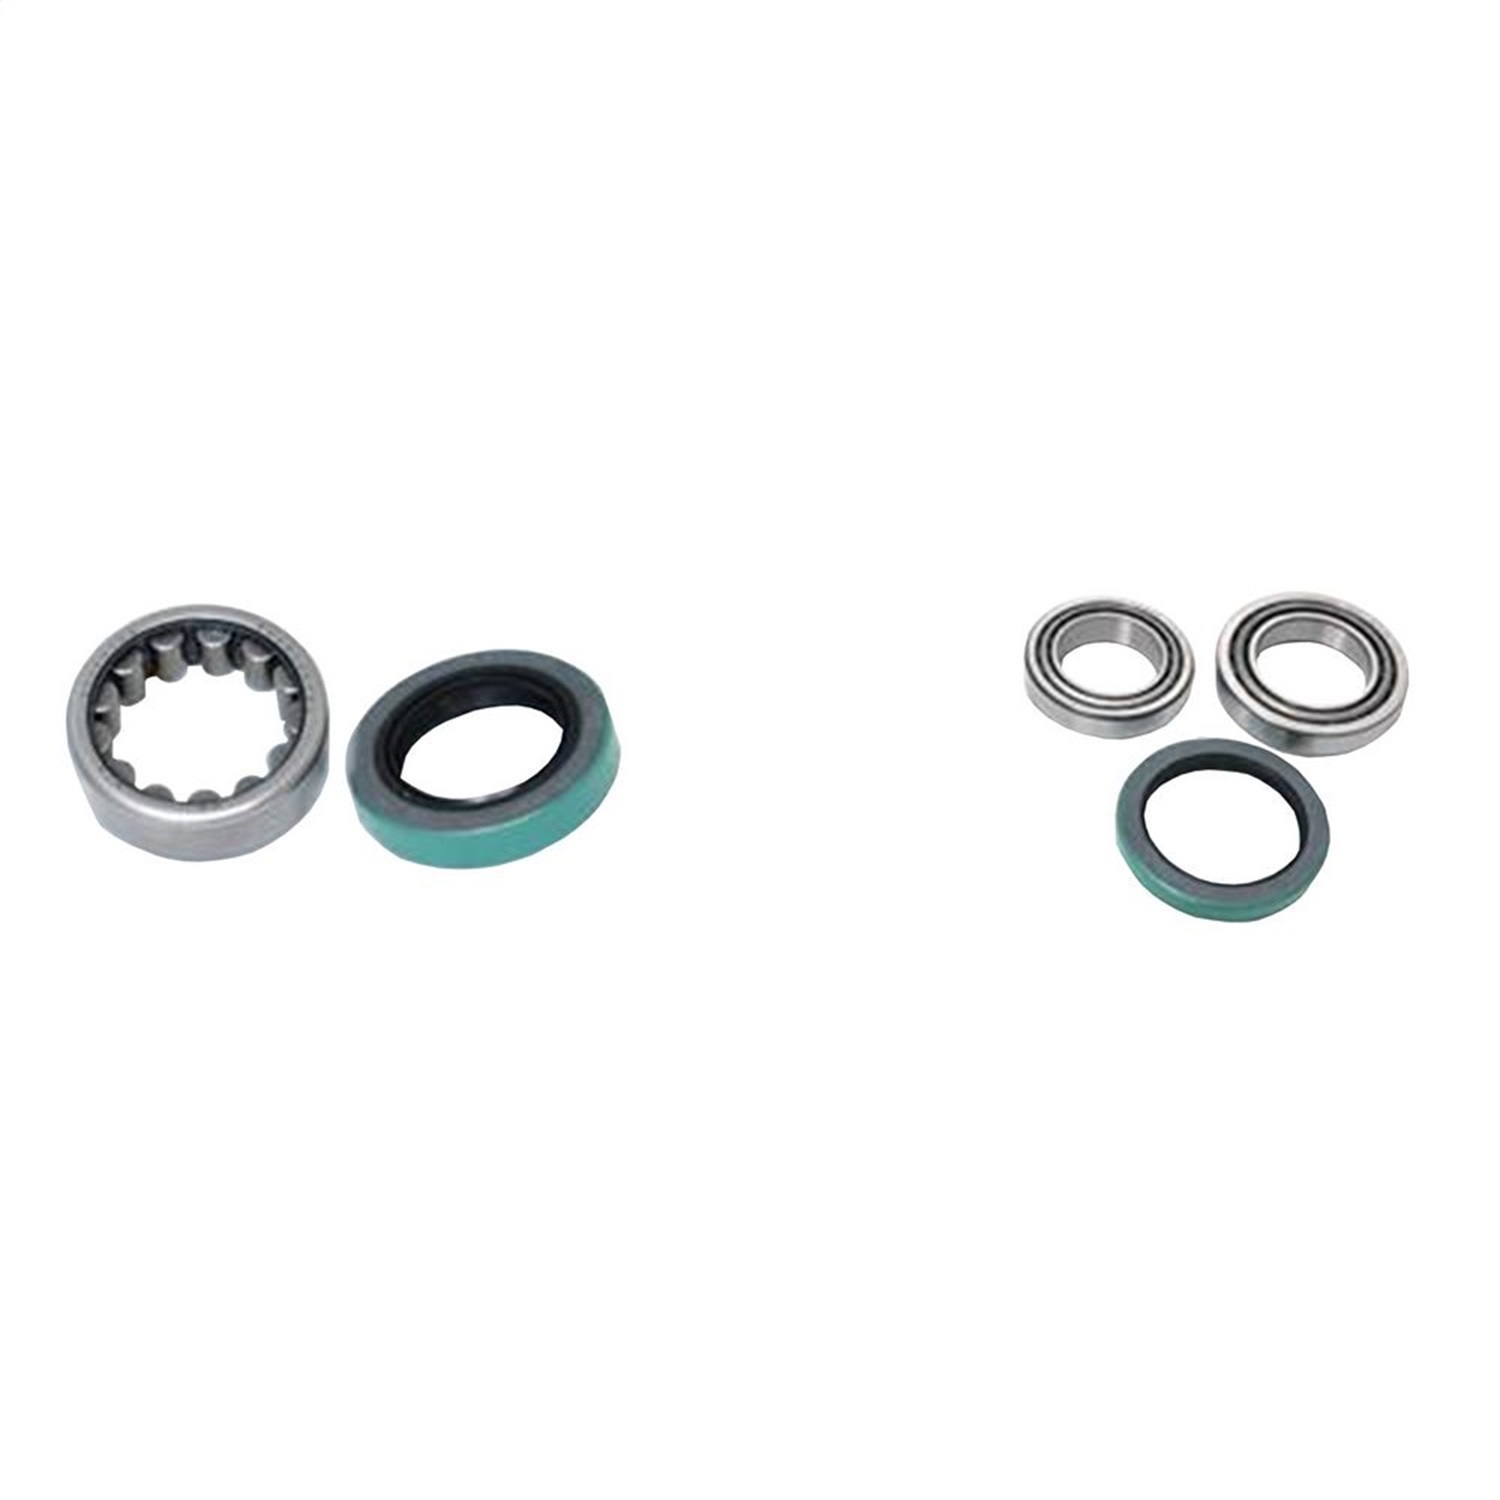 G2 Axle and Gear G2 Axle and Gear 30-9006 Wheel Bearing Kit